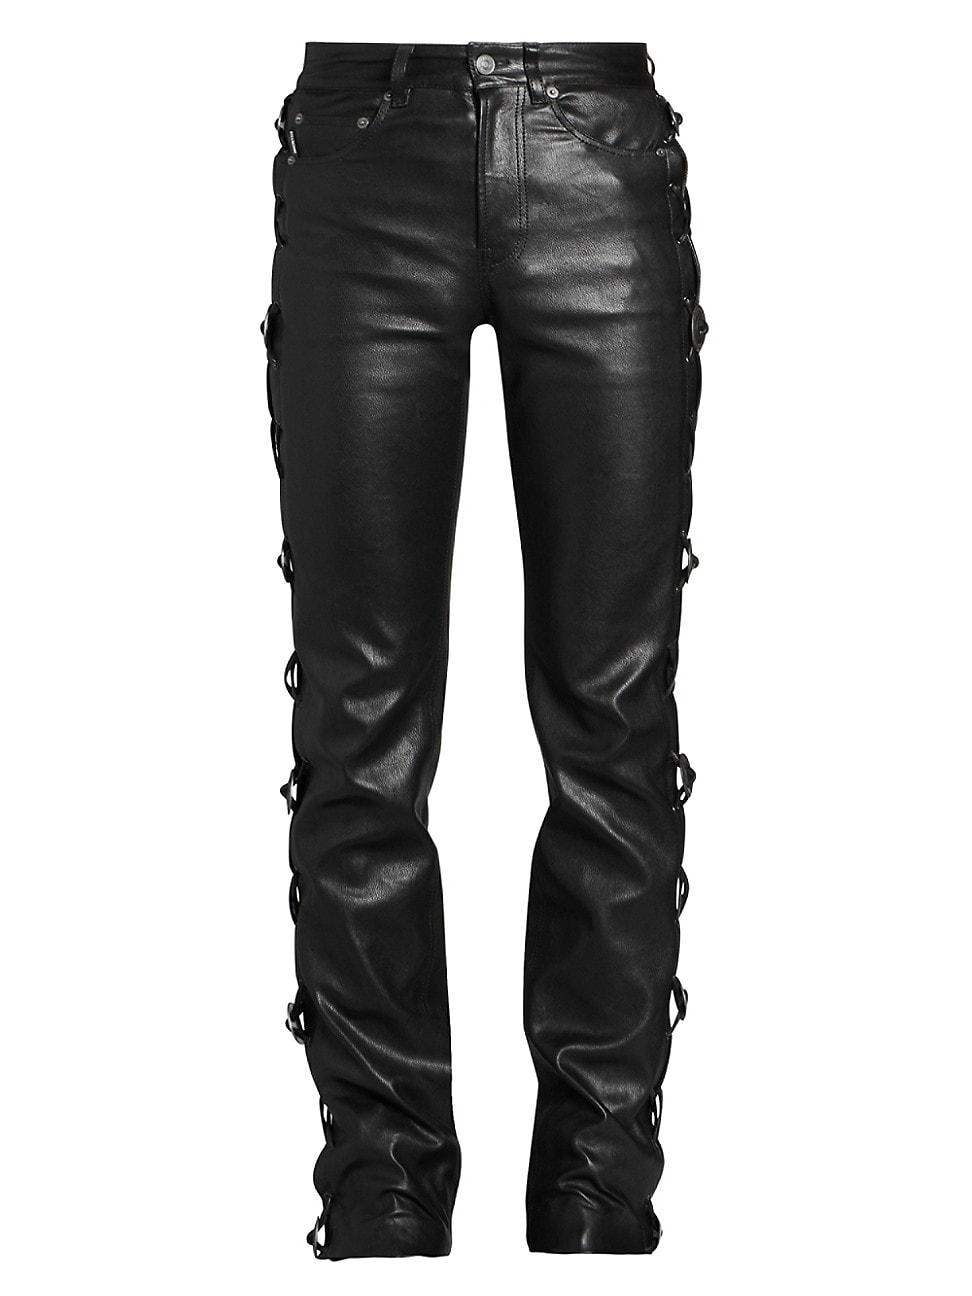 Balenciaga Conchos Laced Leather Skinny Pants in Black for Men - Lyst